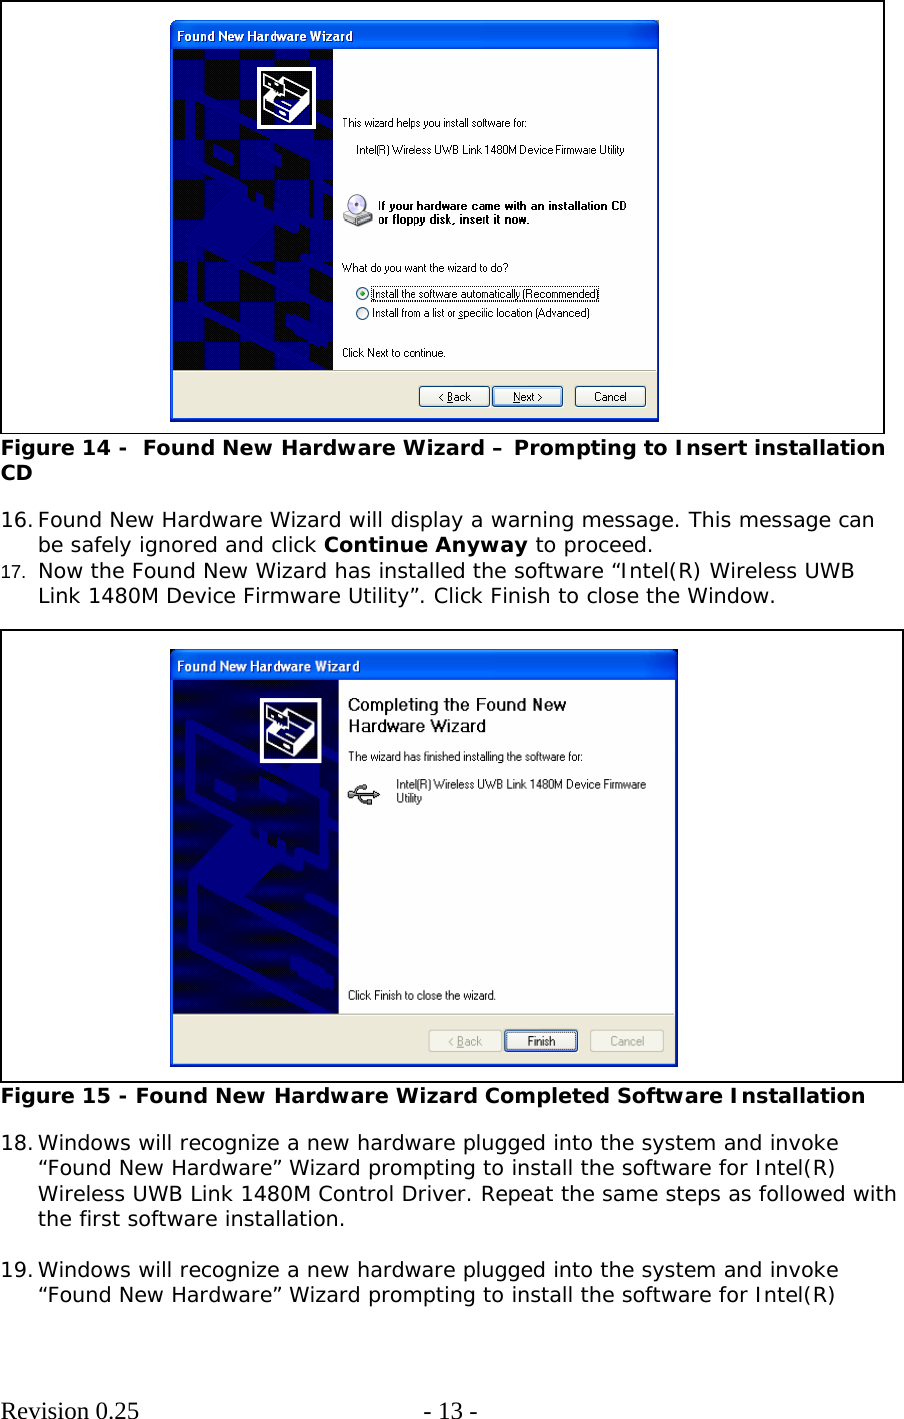        Revision 0.25  - 13 -      Figure 14 -  Found New Hardware Wizard – Prompting to Insert installation CD  16. Found New Hardware Wizard will display a warning message. This message can be safely ignored and click Continue Anyway to proceed. 17.  Now the Found New Wizard has installed the software “Intel(R) Wireless UWB Link 1480M Device Firmware Utility”. Click Finish to close the Window.   Figure 15 - Found New Hardware Wizard Completed Software Installation  18. Windows will recognize a new hardware plugged into the system and invoke “Found New Hardware” Wizard prompting to install the software for Intel(R) Wireless UWB Link 1480M Control Driver. Repeat the same steps as followed with the first software installation.  19. Windows will recognize a new hardware plugged into the system and invoke “Found New Hardware” Wizard prompting to install the software for Intel(R) 